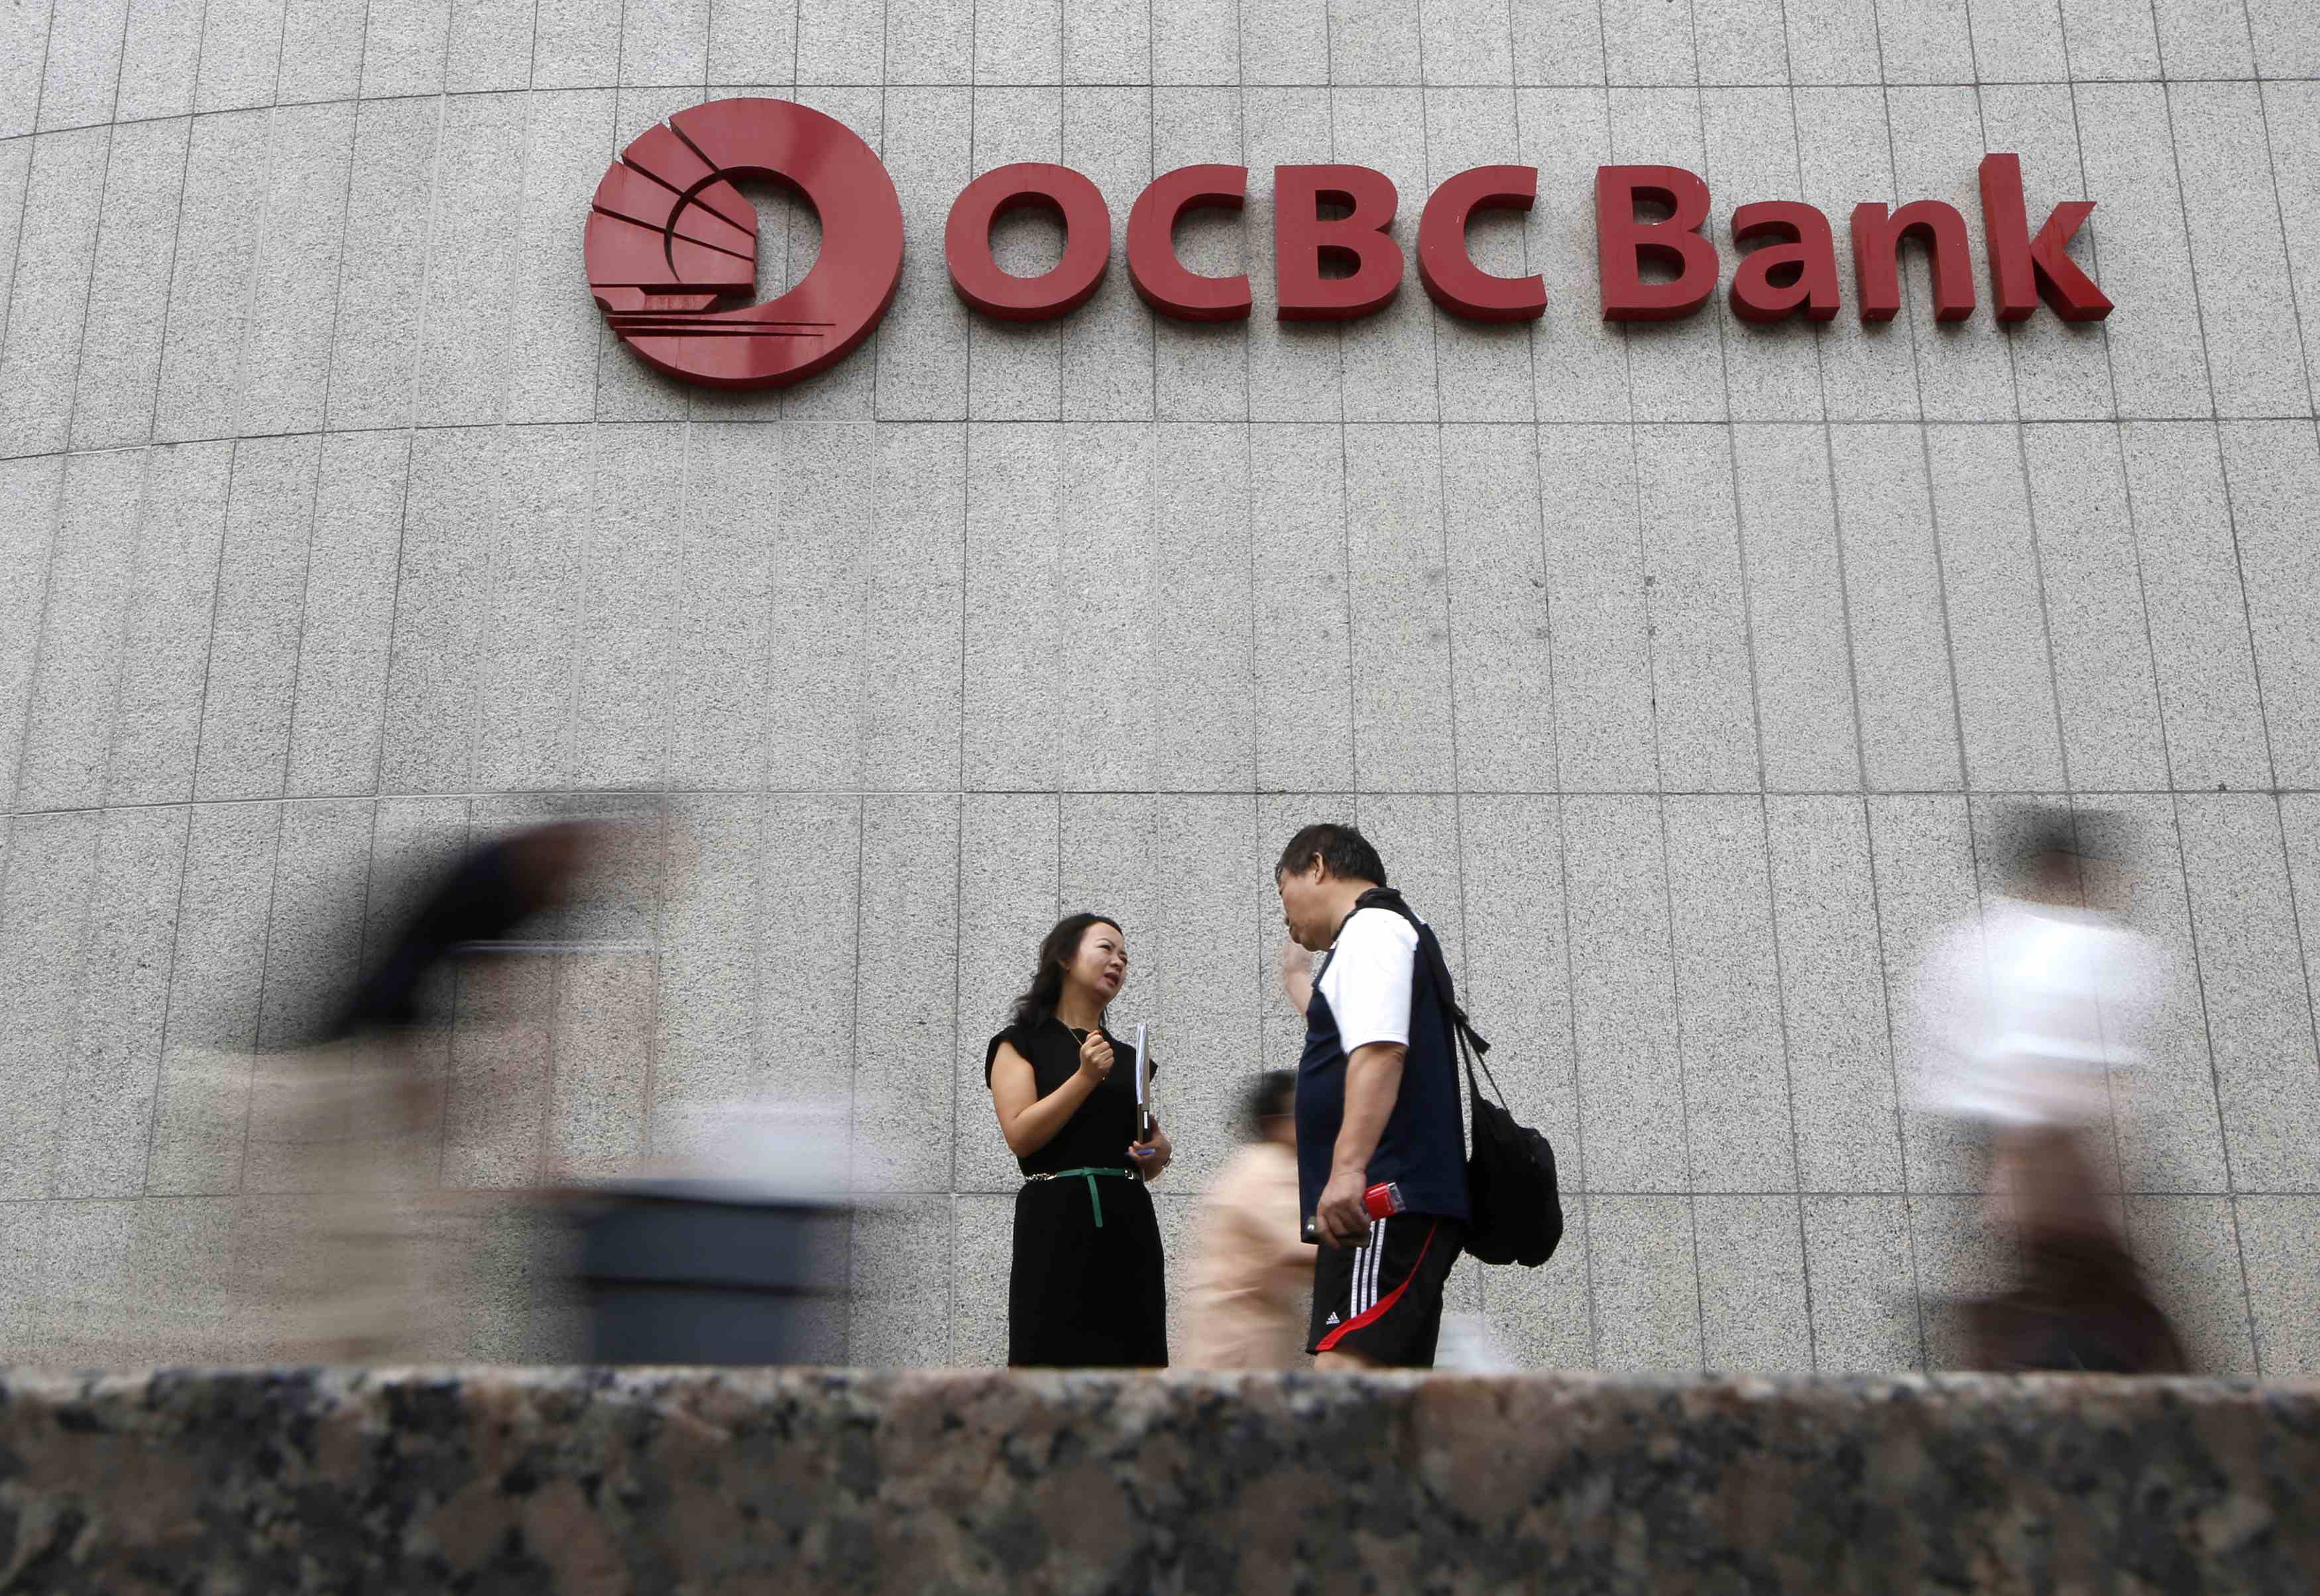 Fitch Ratings was concerned about OCBC's increased exposure to Greater China. Photo: Reuters